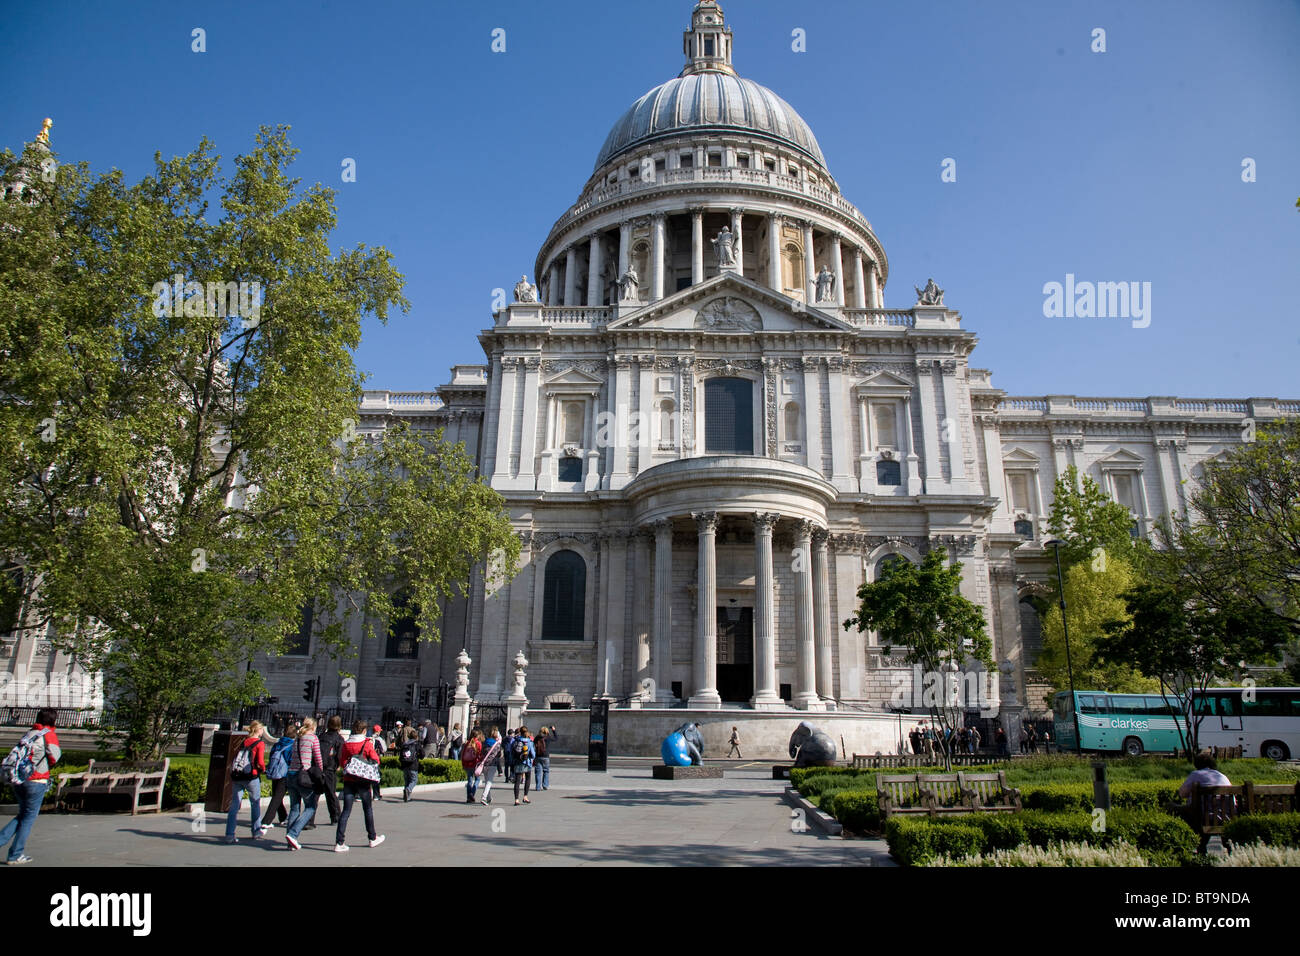 Saint Paul's Cathedral. City of London, England Banque D'Images